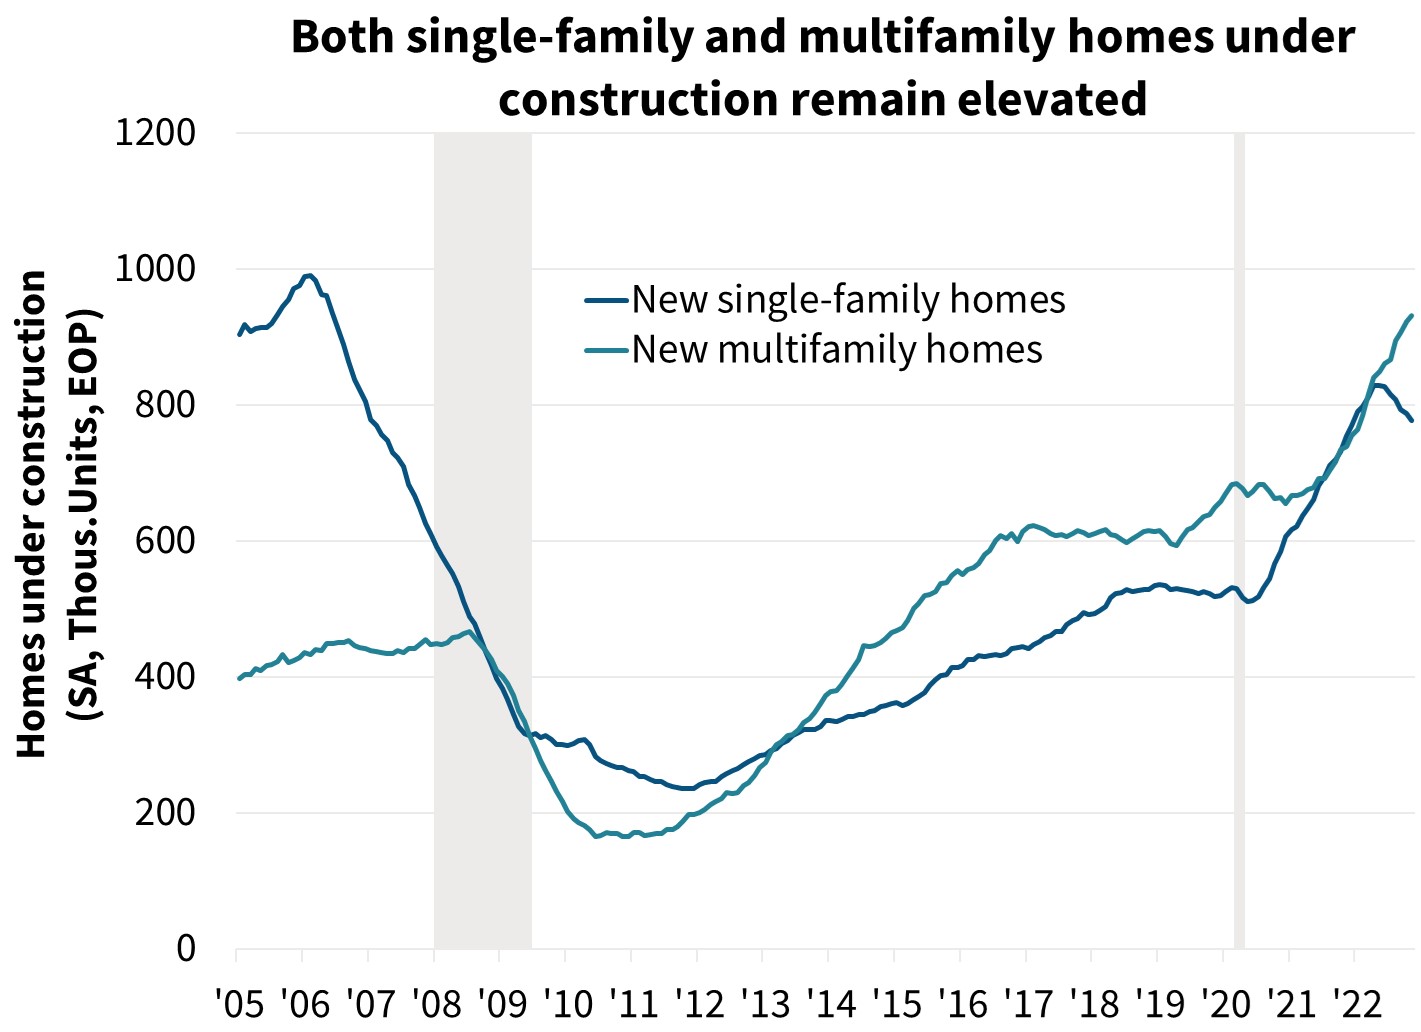  Both single-family and multifamily homes under construction remain elevated 